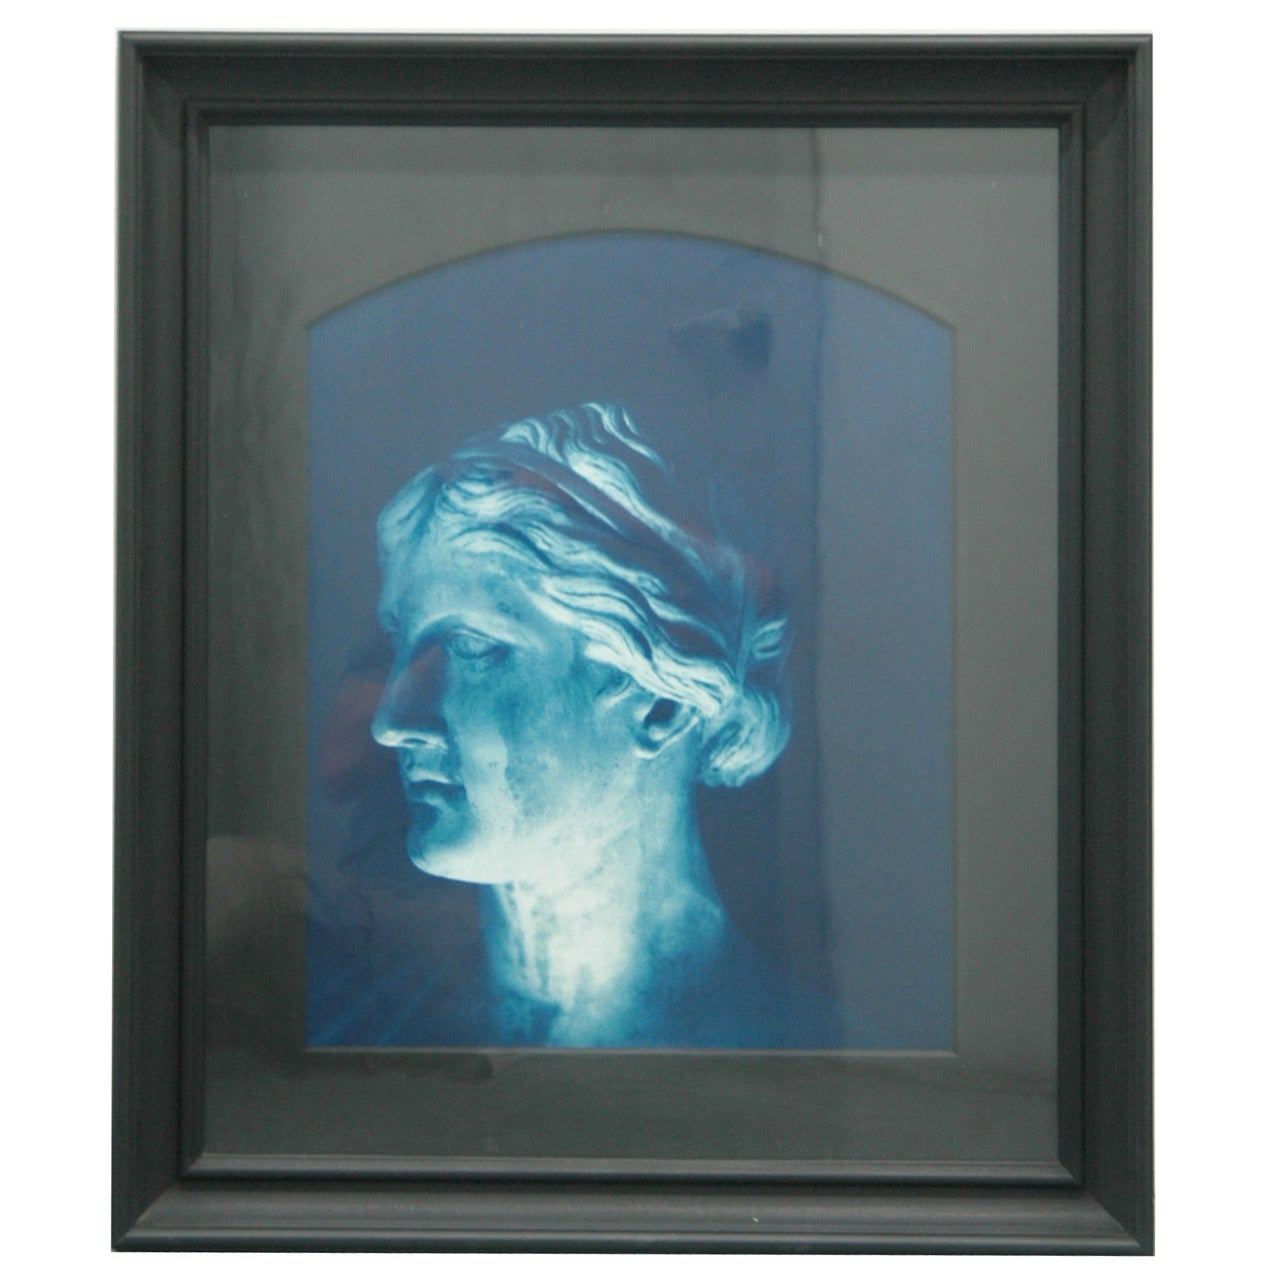 "Photograph of a Grecian Bust" by John Dugdale